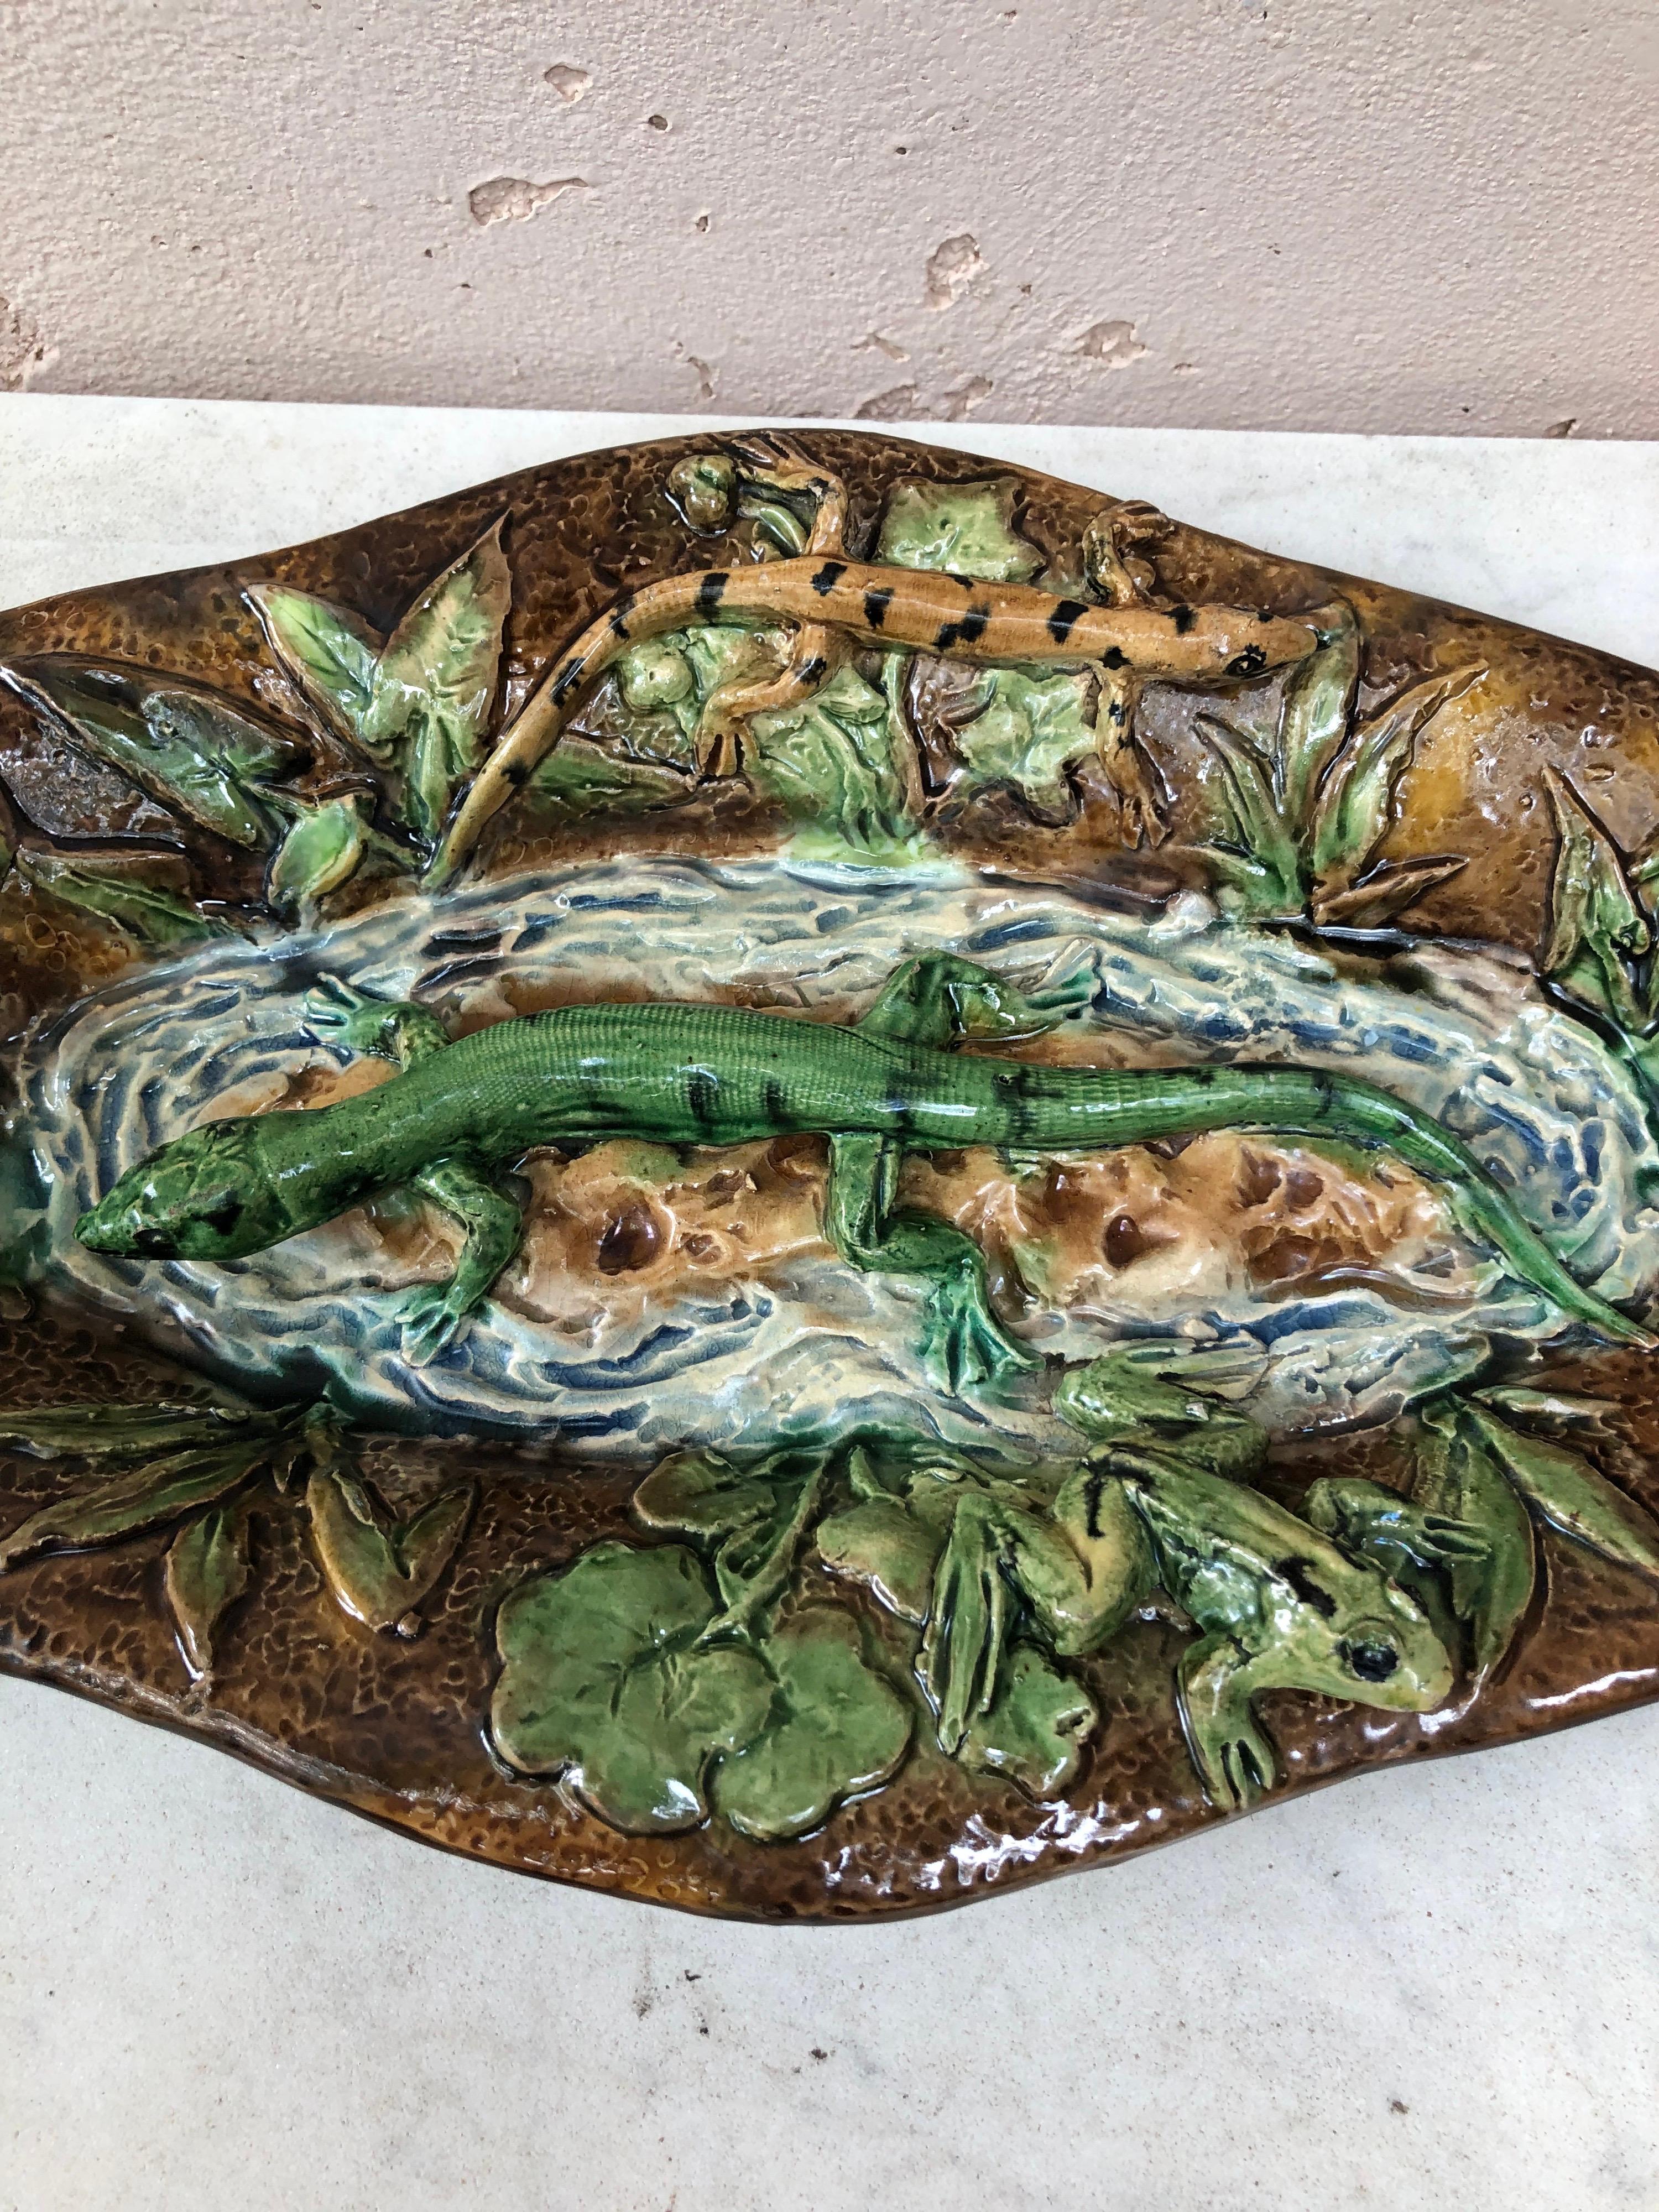 19th century Majolica Palissy lizard oval wall platter signed Alfred Renoleau.
2 lizards, shells and frog.
 